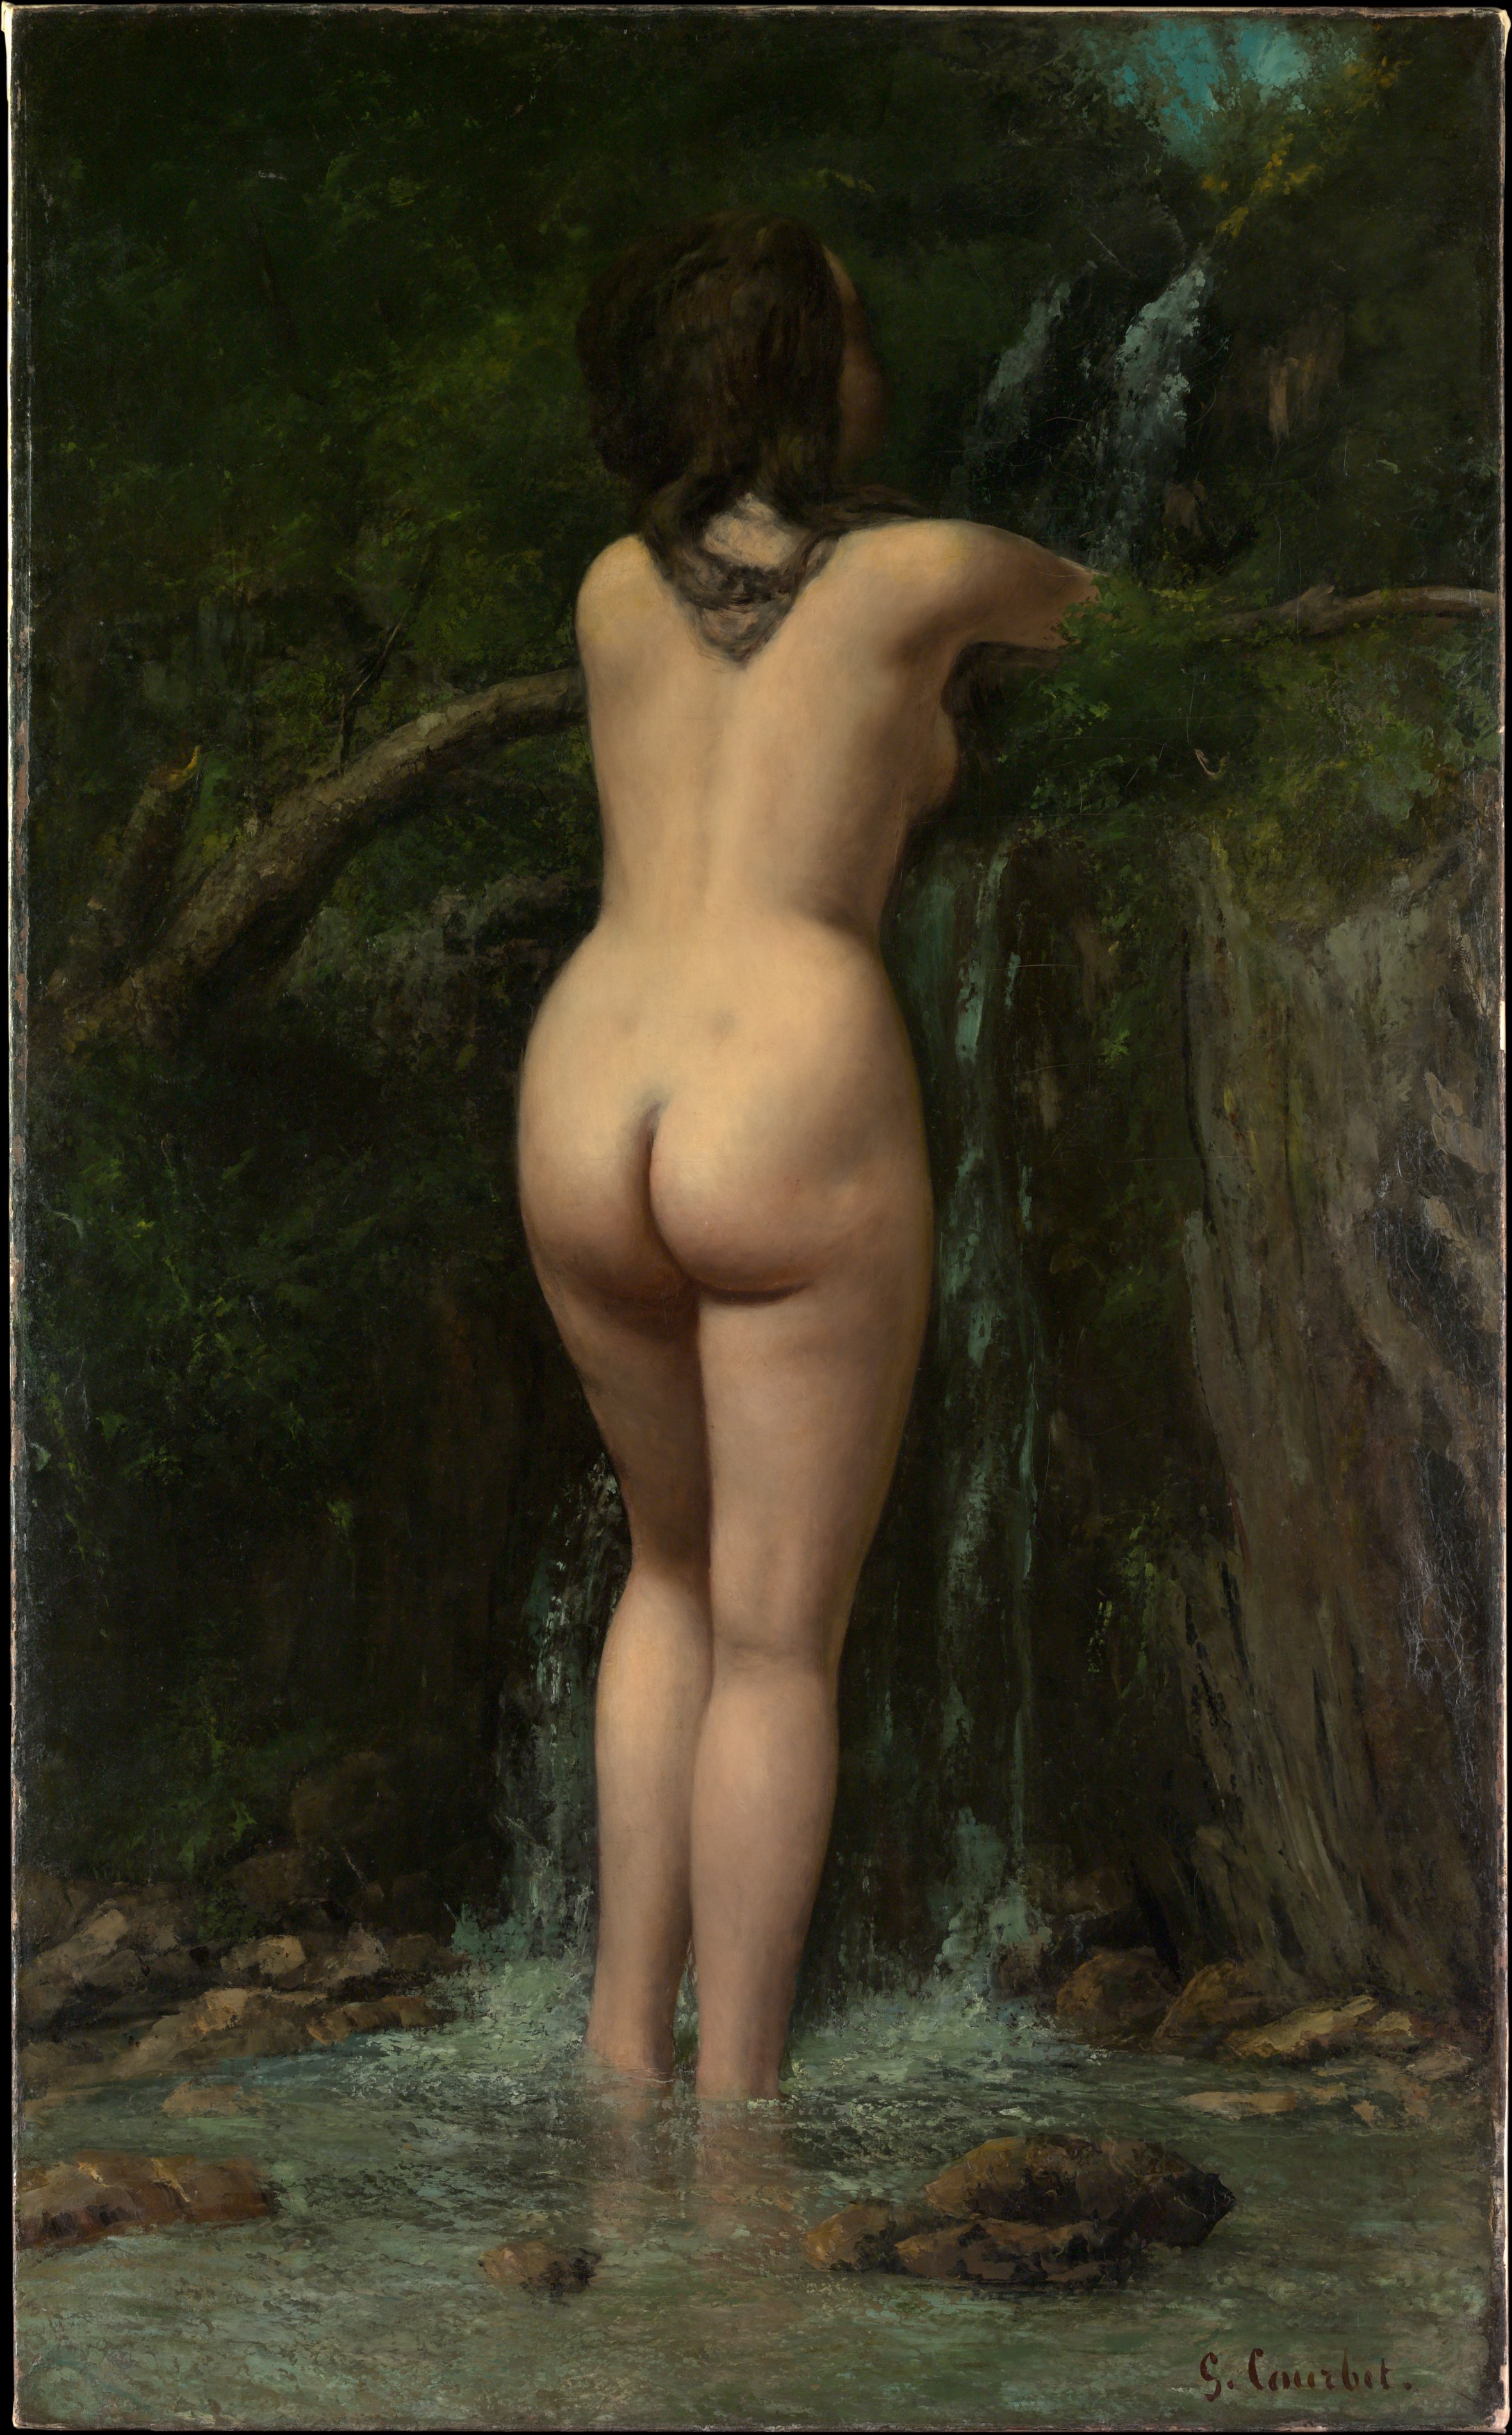 The Source by Gustave Courbet - 1862 - 120 x 74.3 cm Metropolitan Museum of Art